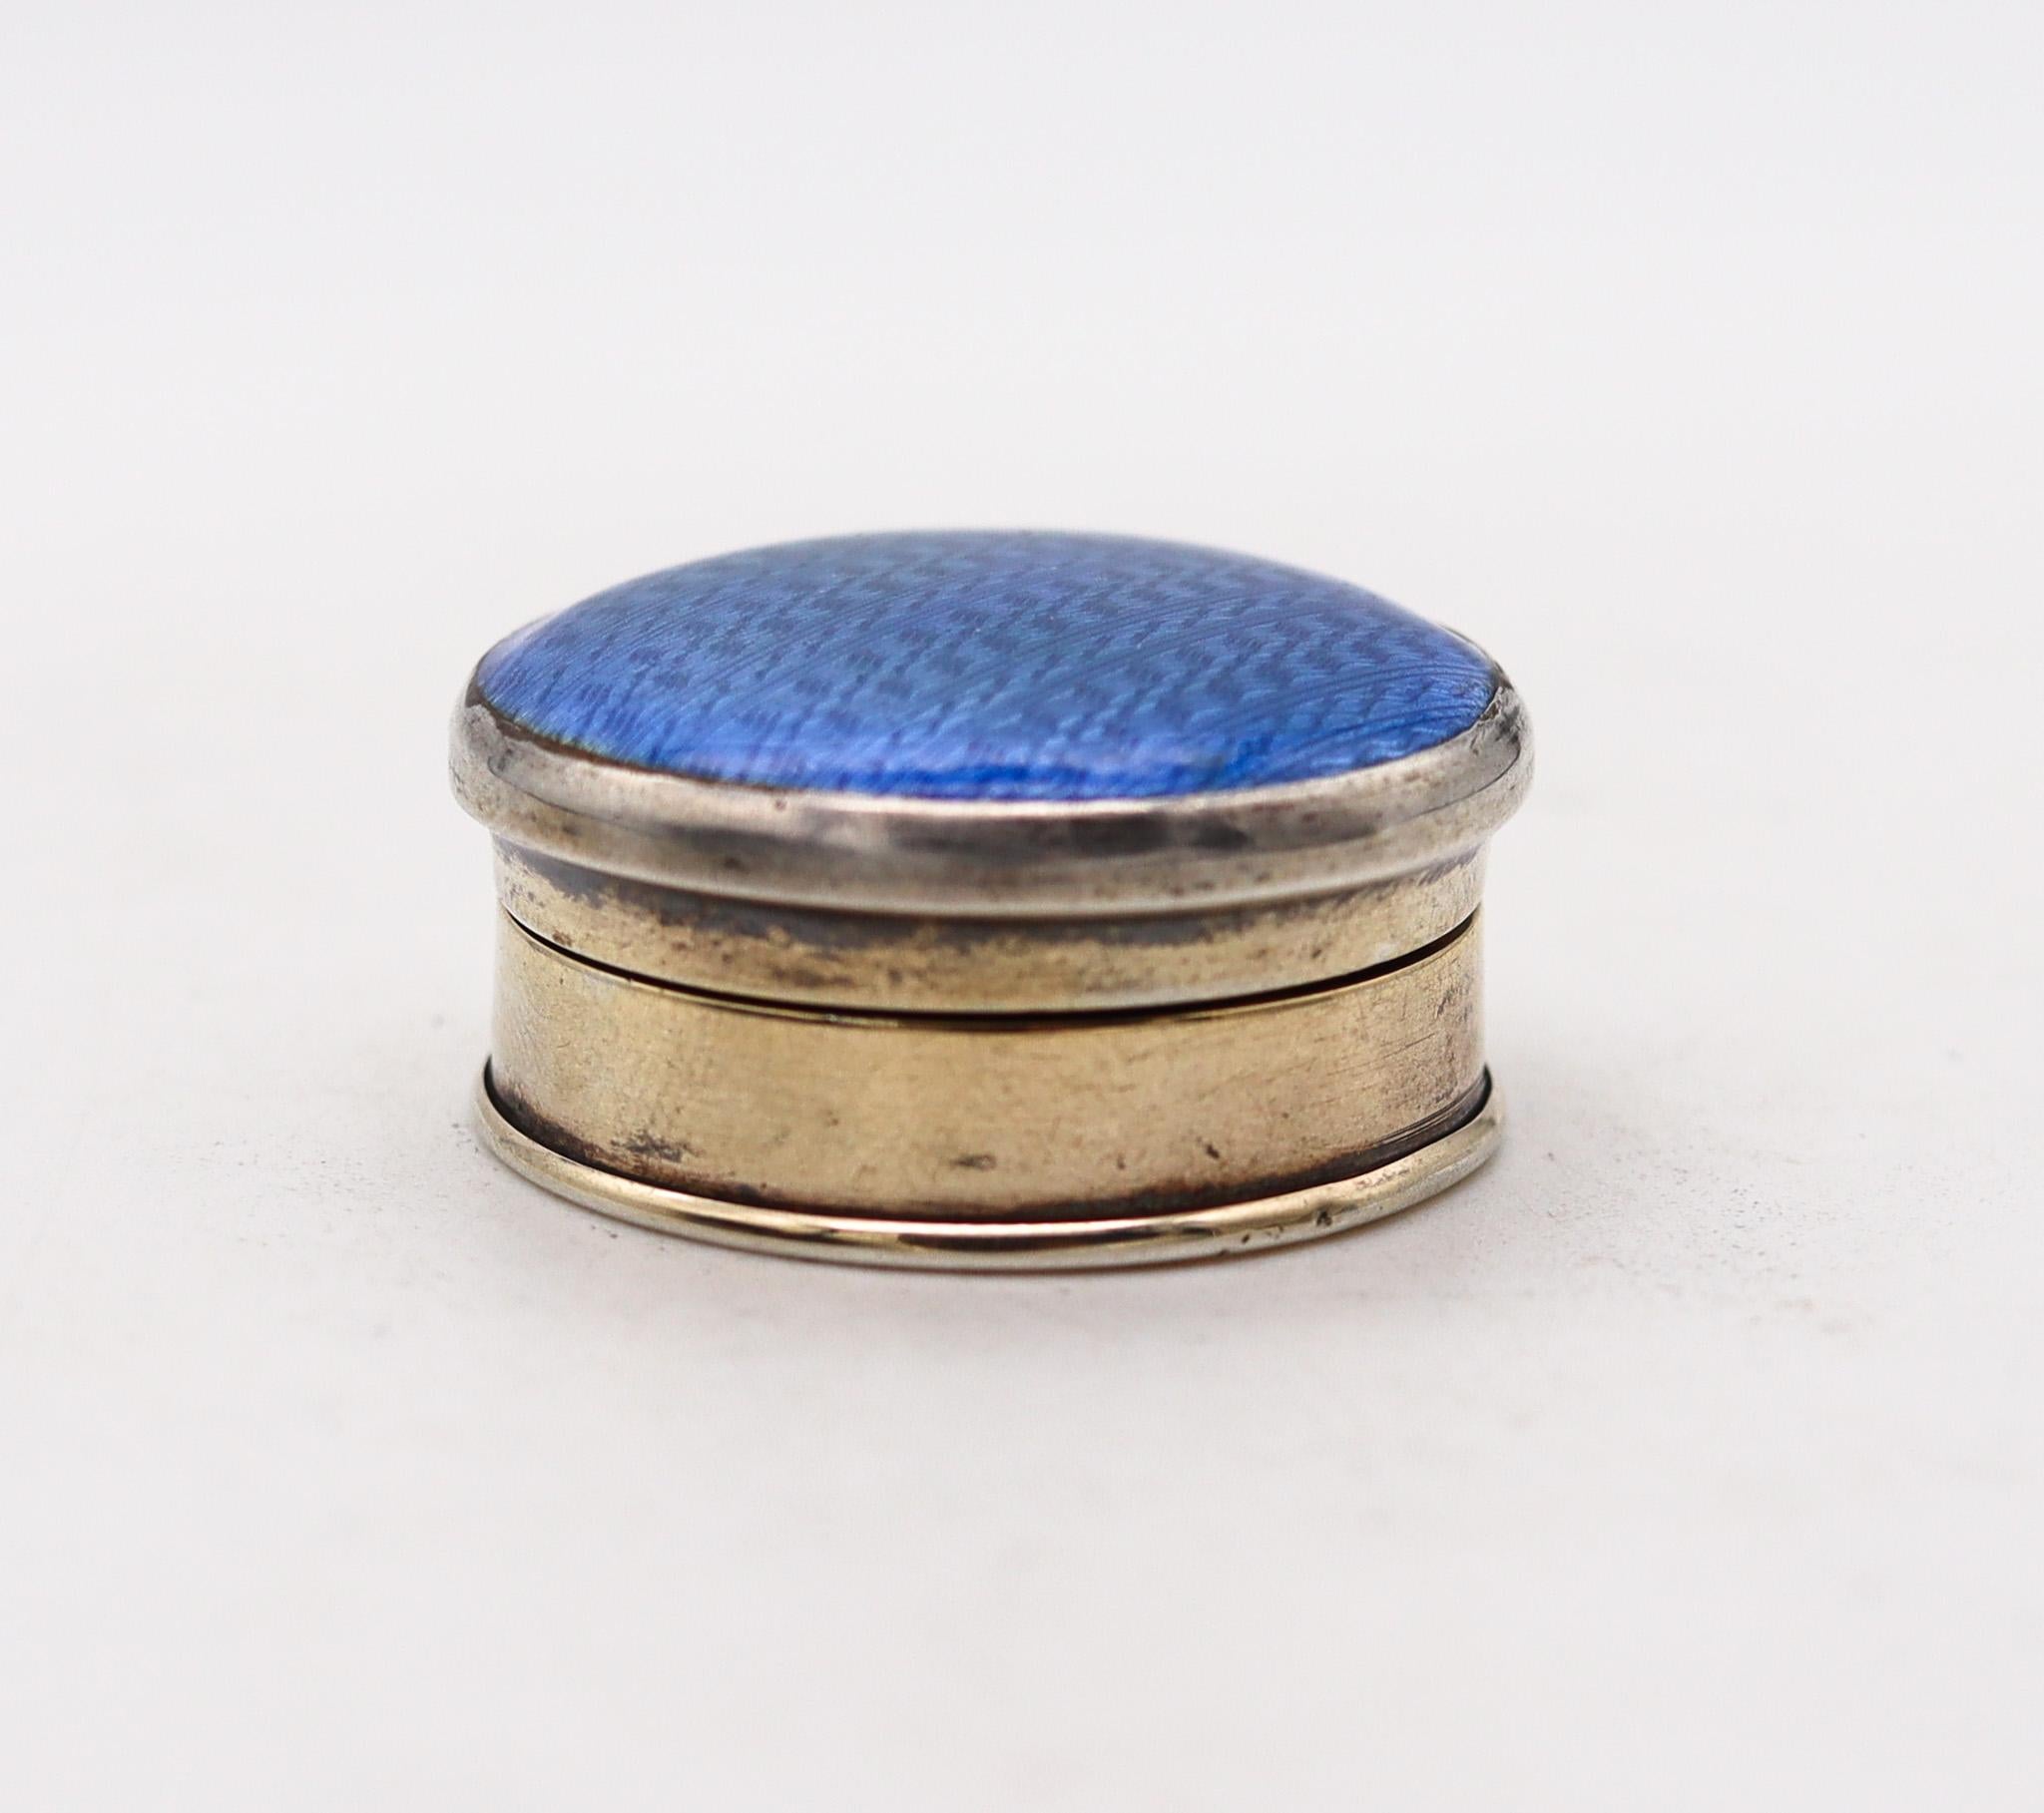 An art deco guilloche enamel pills box made by Albert Carter.

Beautiful enamel round pill box, created in Birmingham England during the art deco period. This beautiful antique piece was carefully made at the workshop of Albert Carter back in the